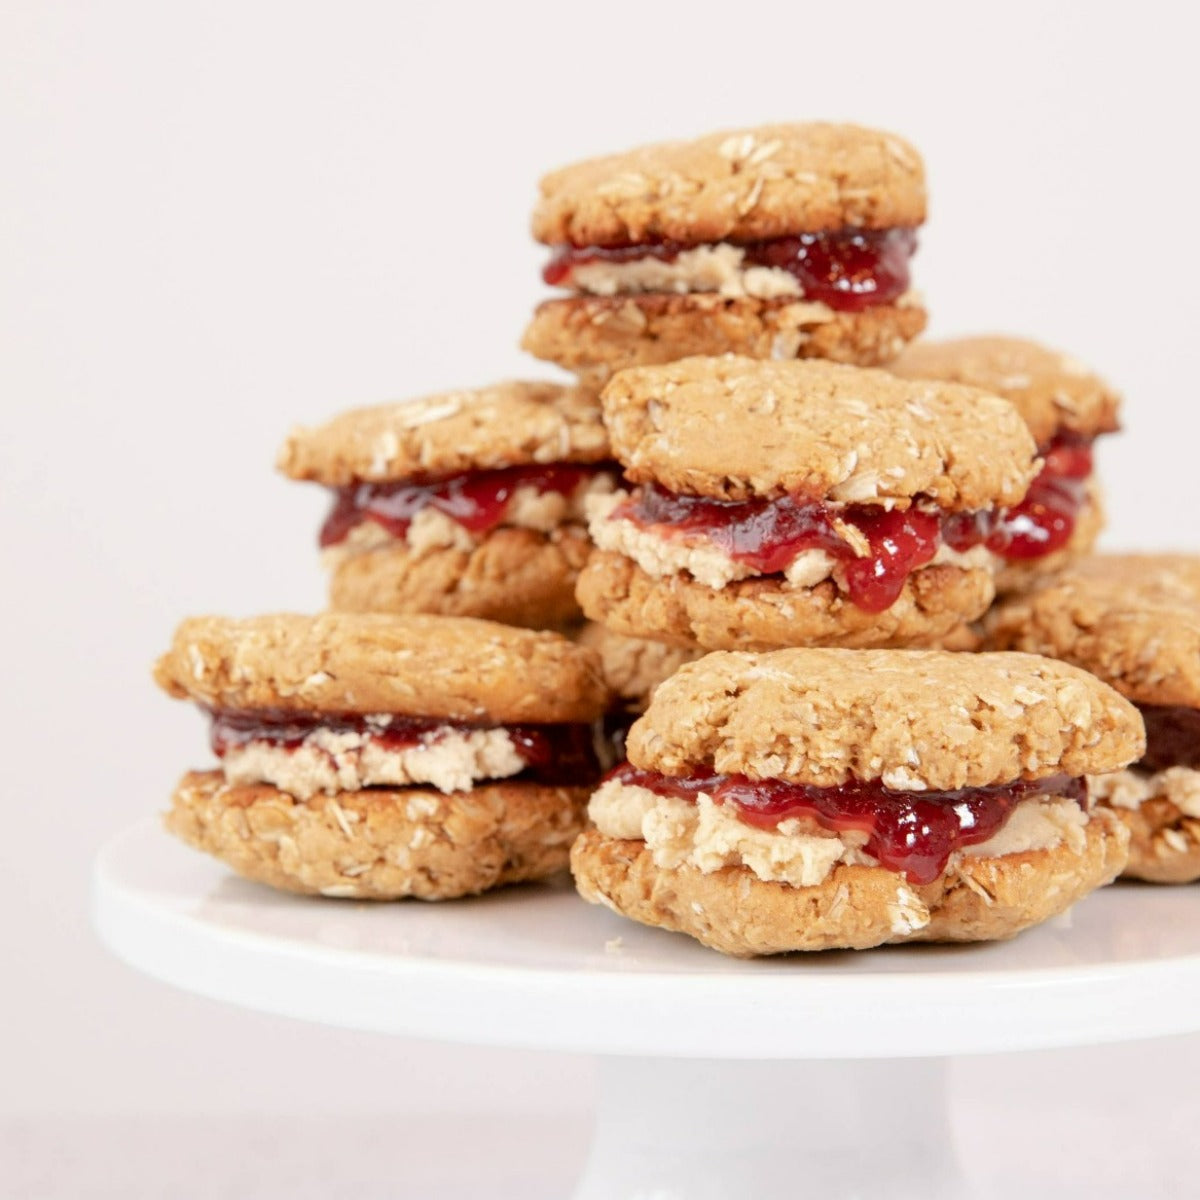 strawberry spread with no sugar on cookies